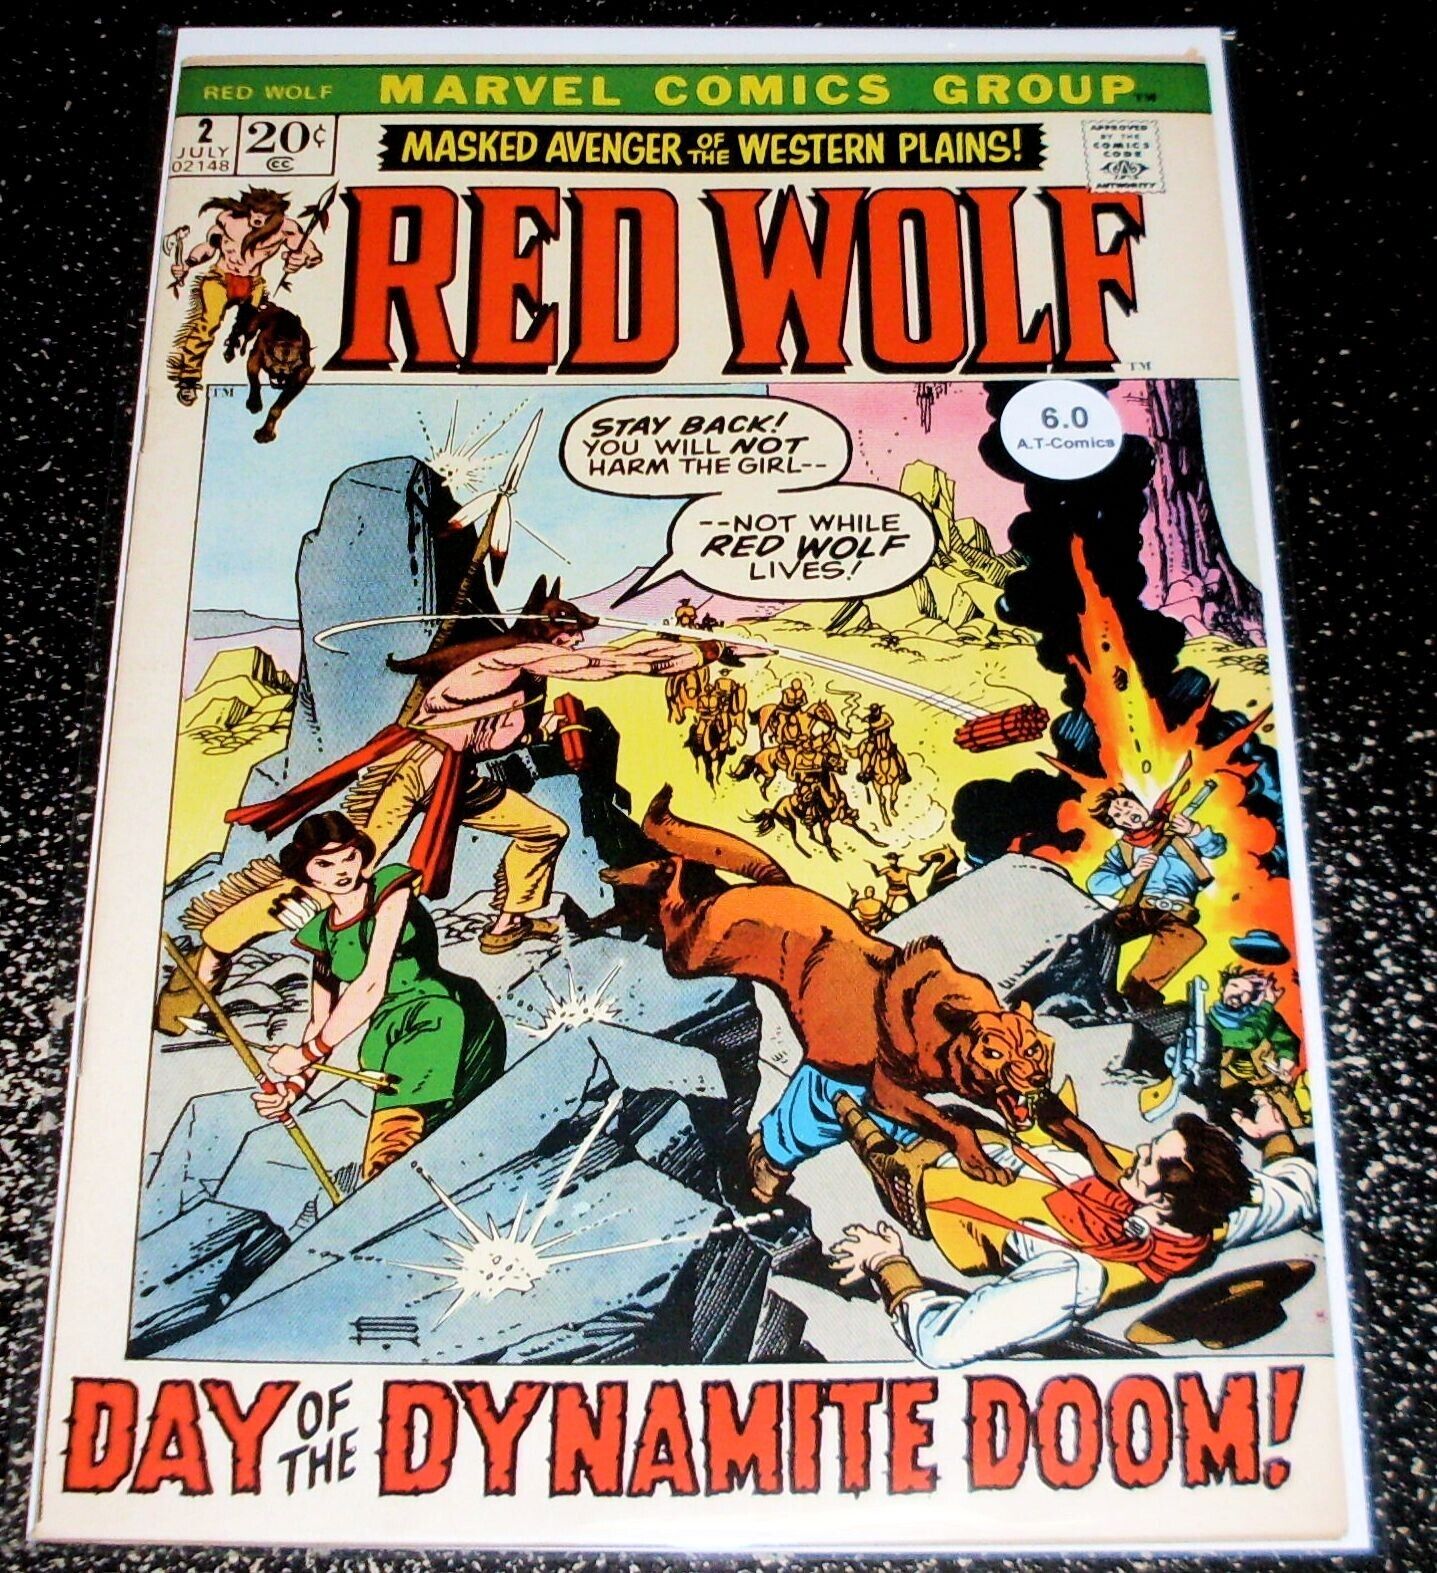 Red Wolf 2 (6.0) 1st Print Marvel Comics 1972 - Flat Rate Shipping